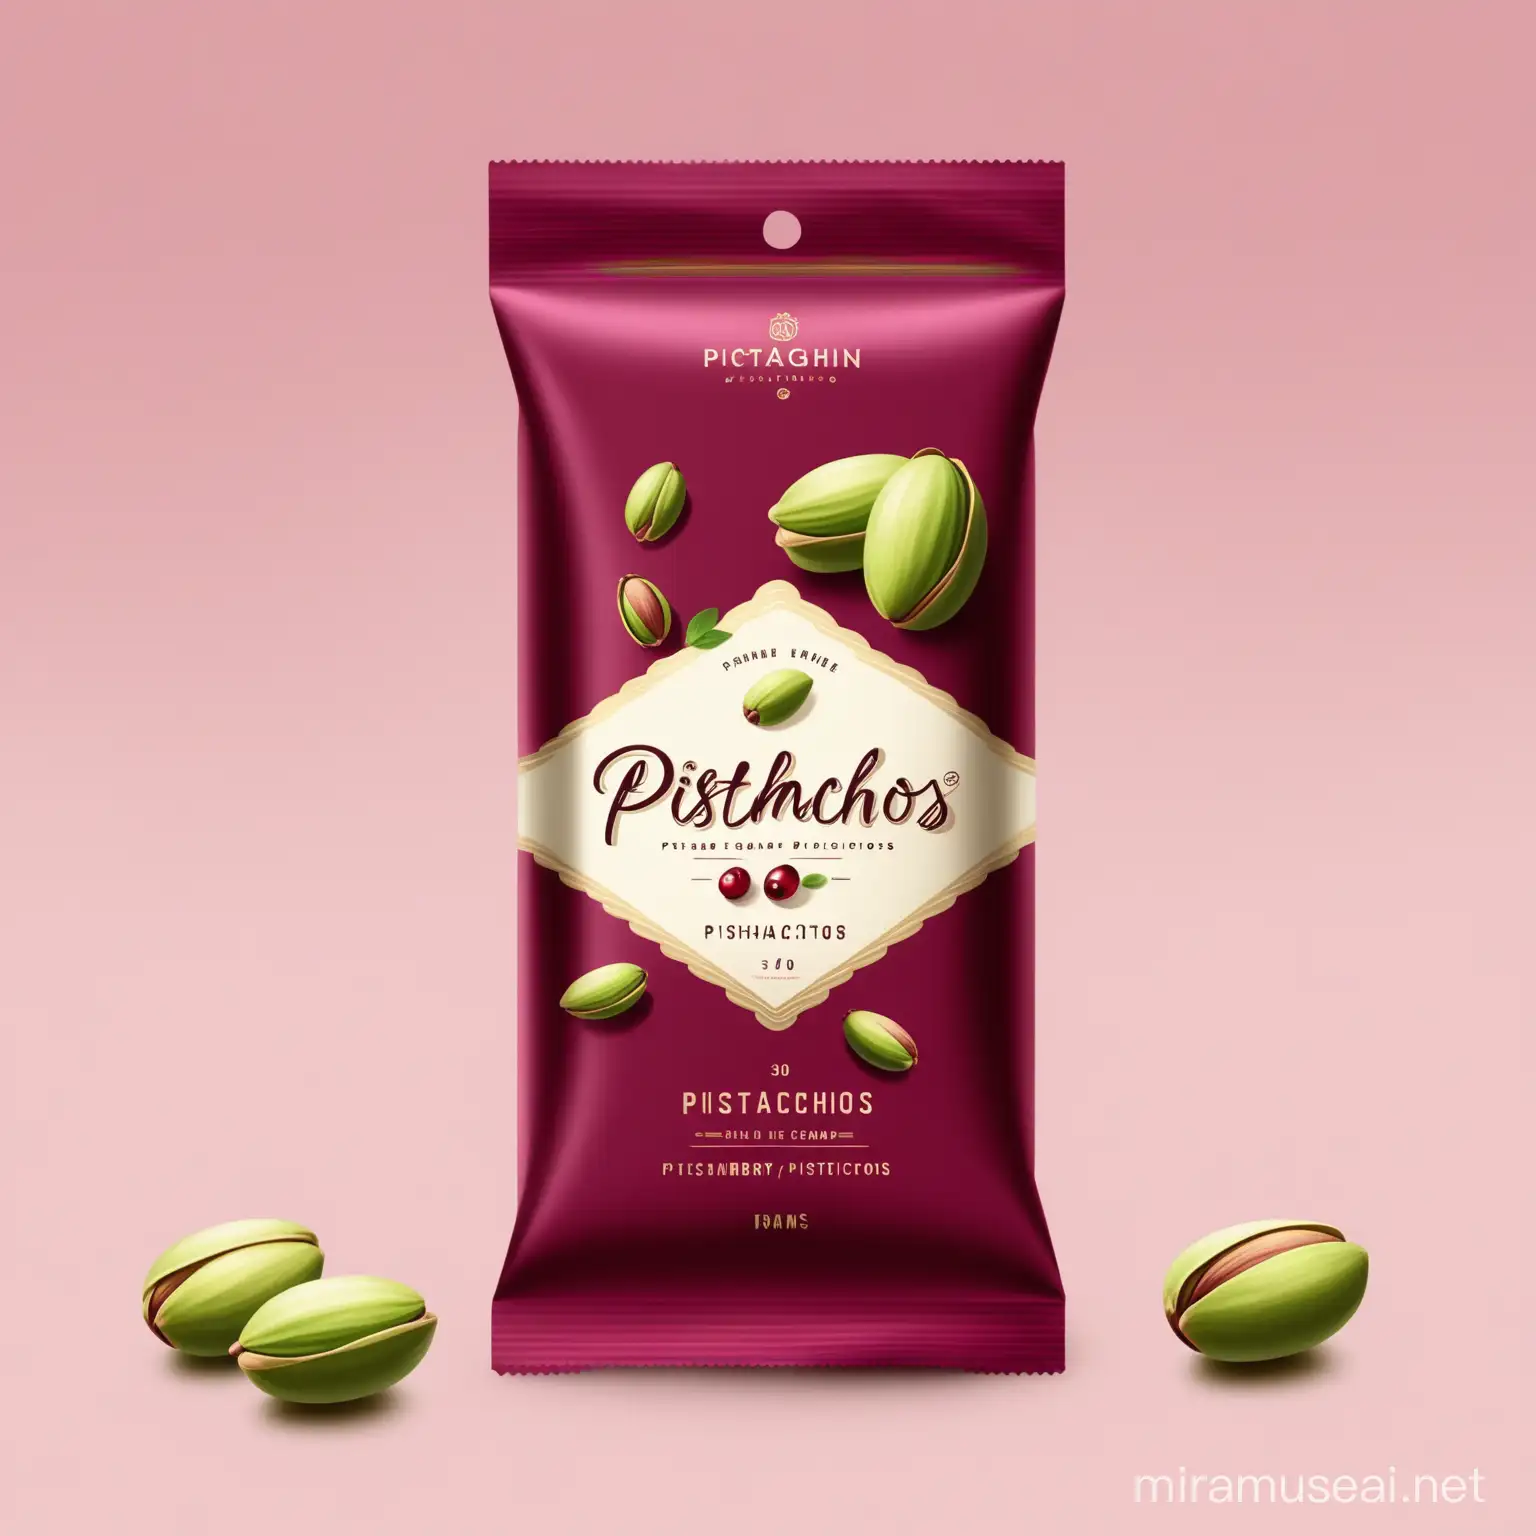 Chic Rectangular Pistachio Packaging with 30g Capacity in Cranberry and Navy Shades